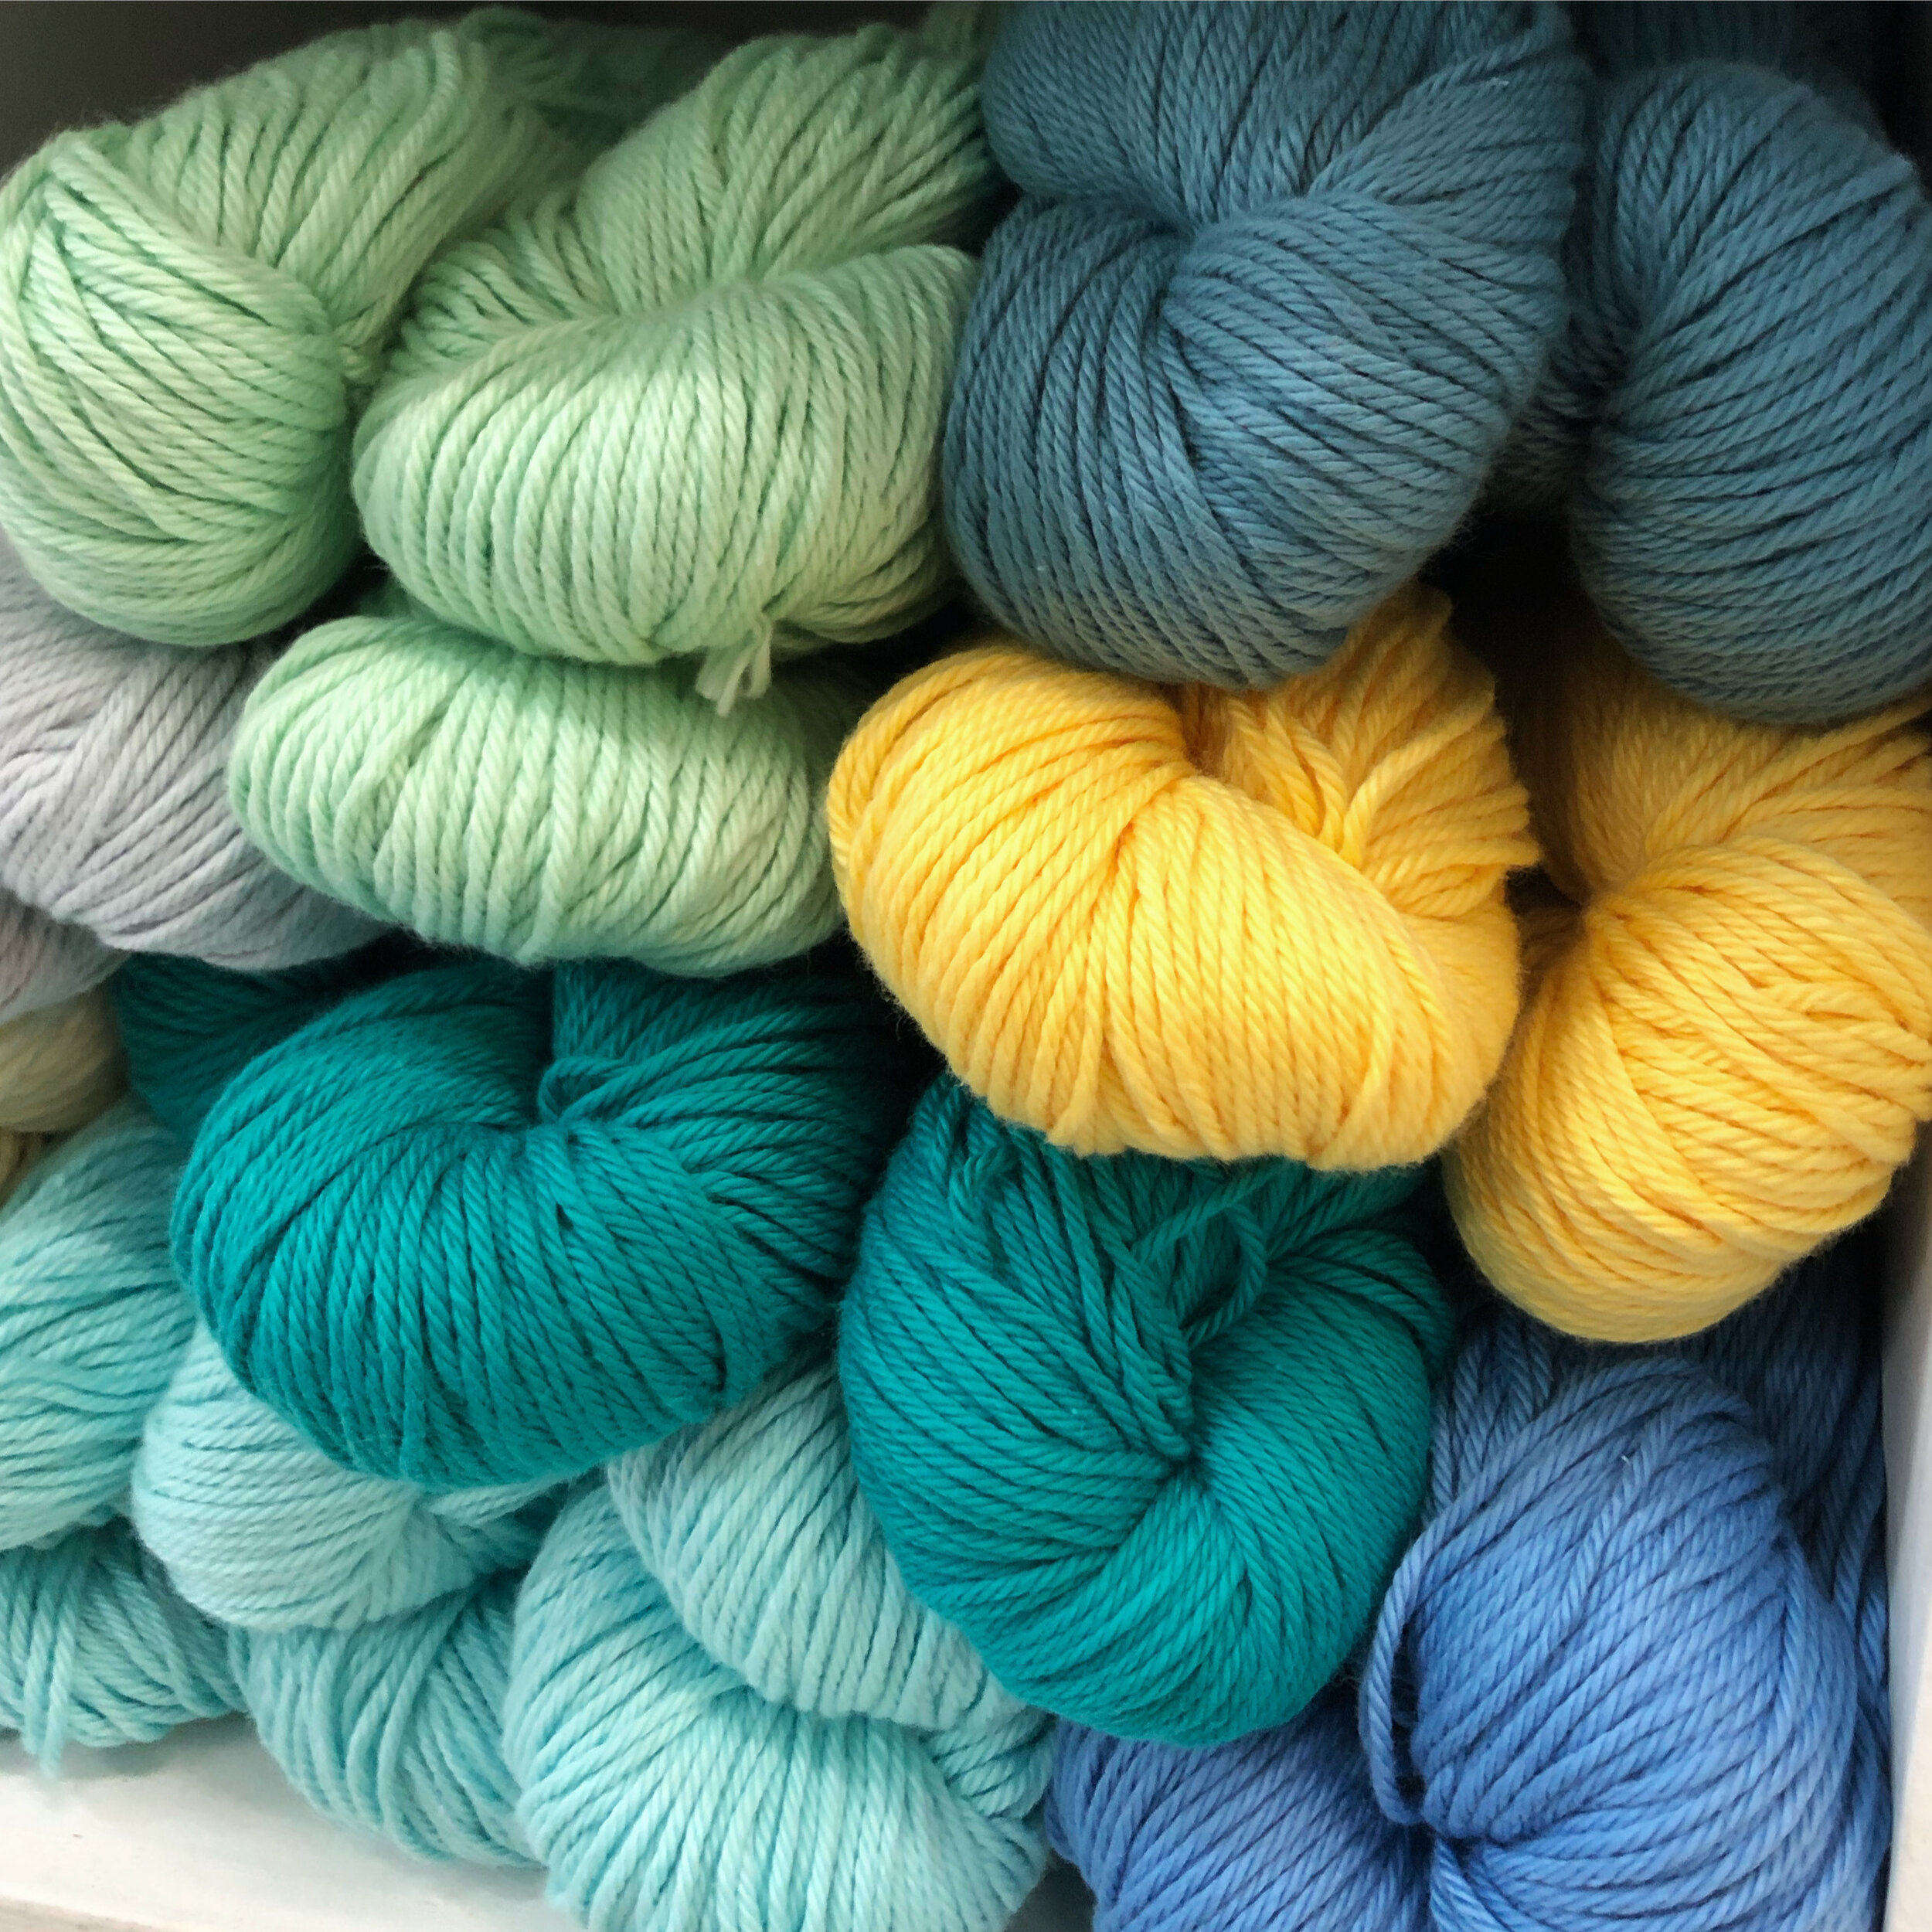 More than 25 Worsted Weight Yarns for Blanket Knitting — Fifty Four Ten  Studio